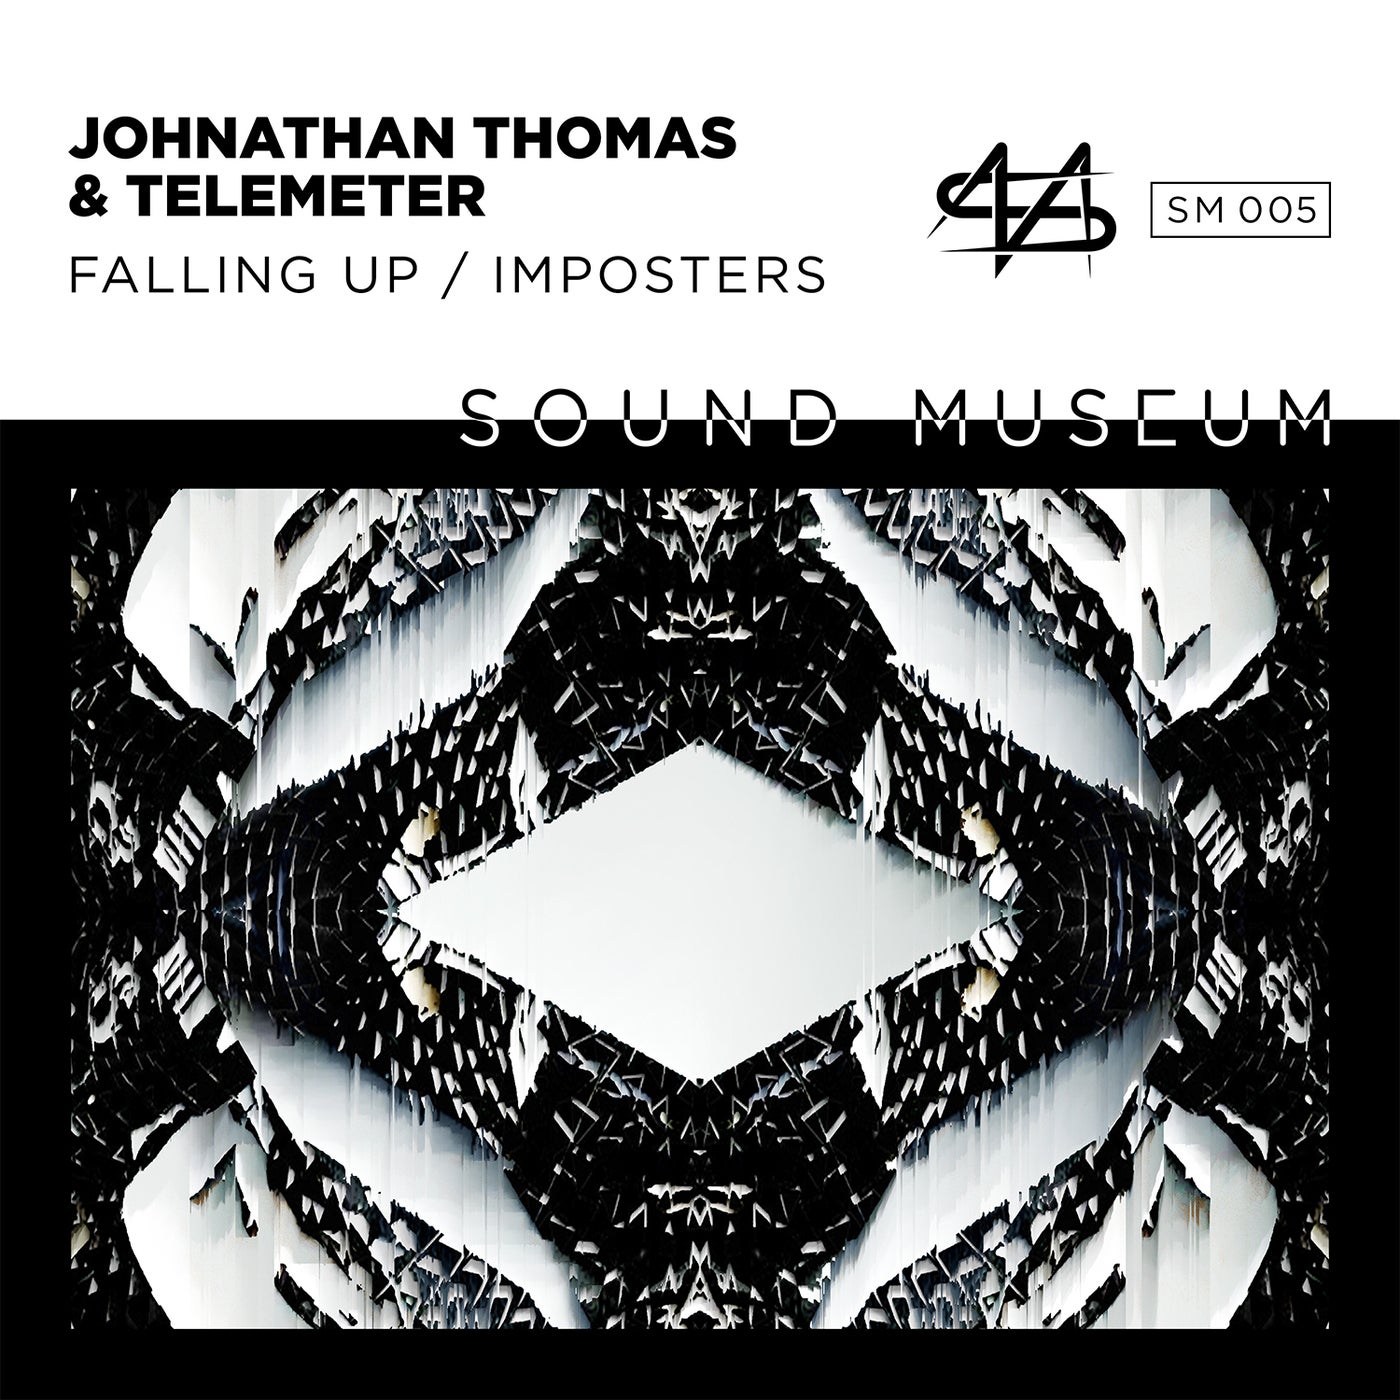 Falling up / Imposters